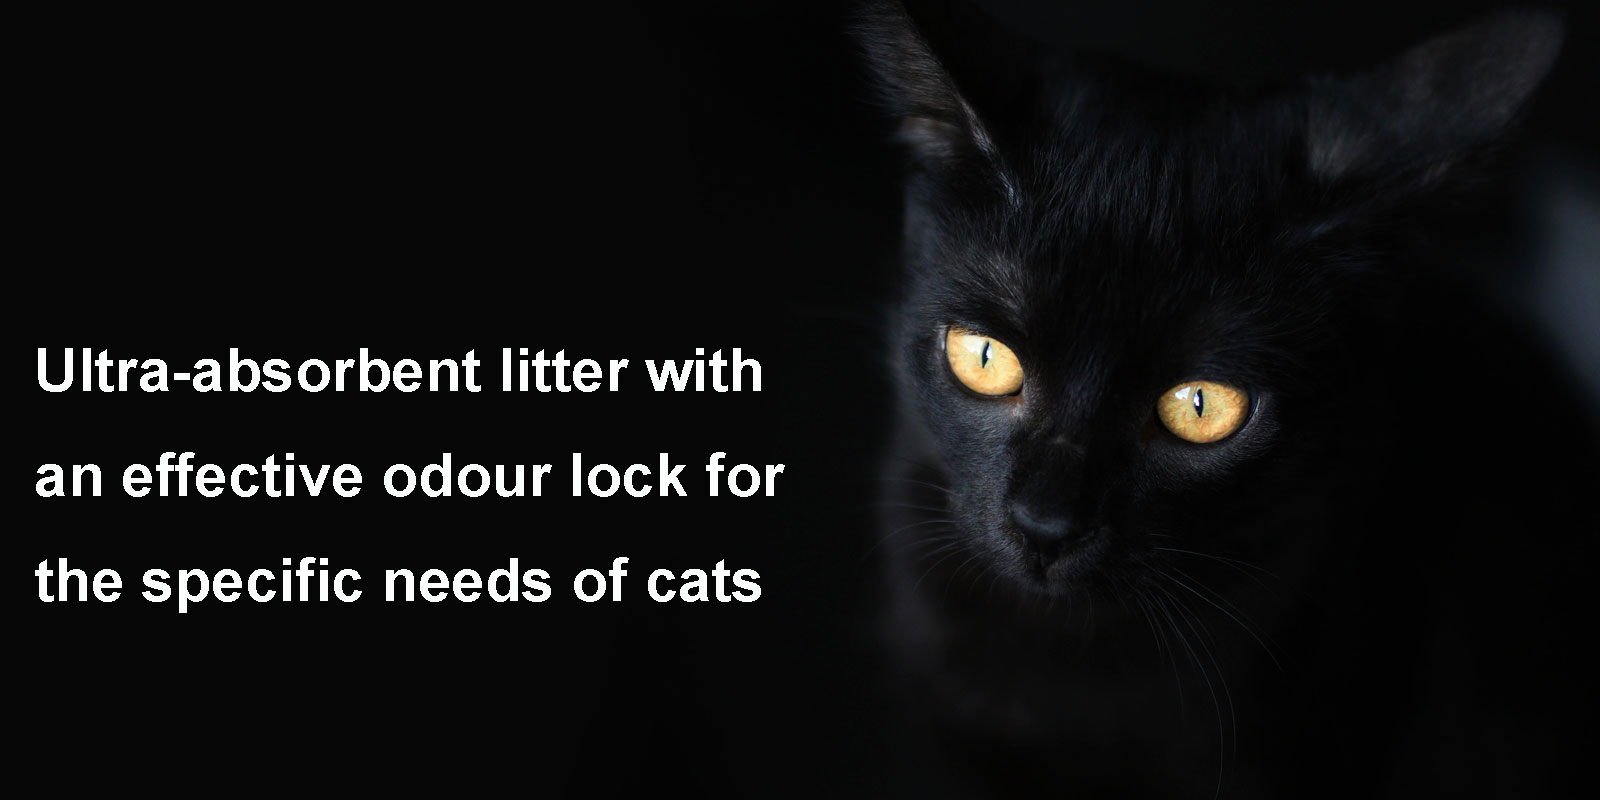 odour lock for thUltra-absorbent litter with an effective od